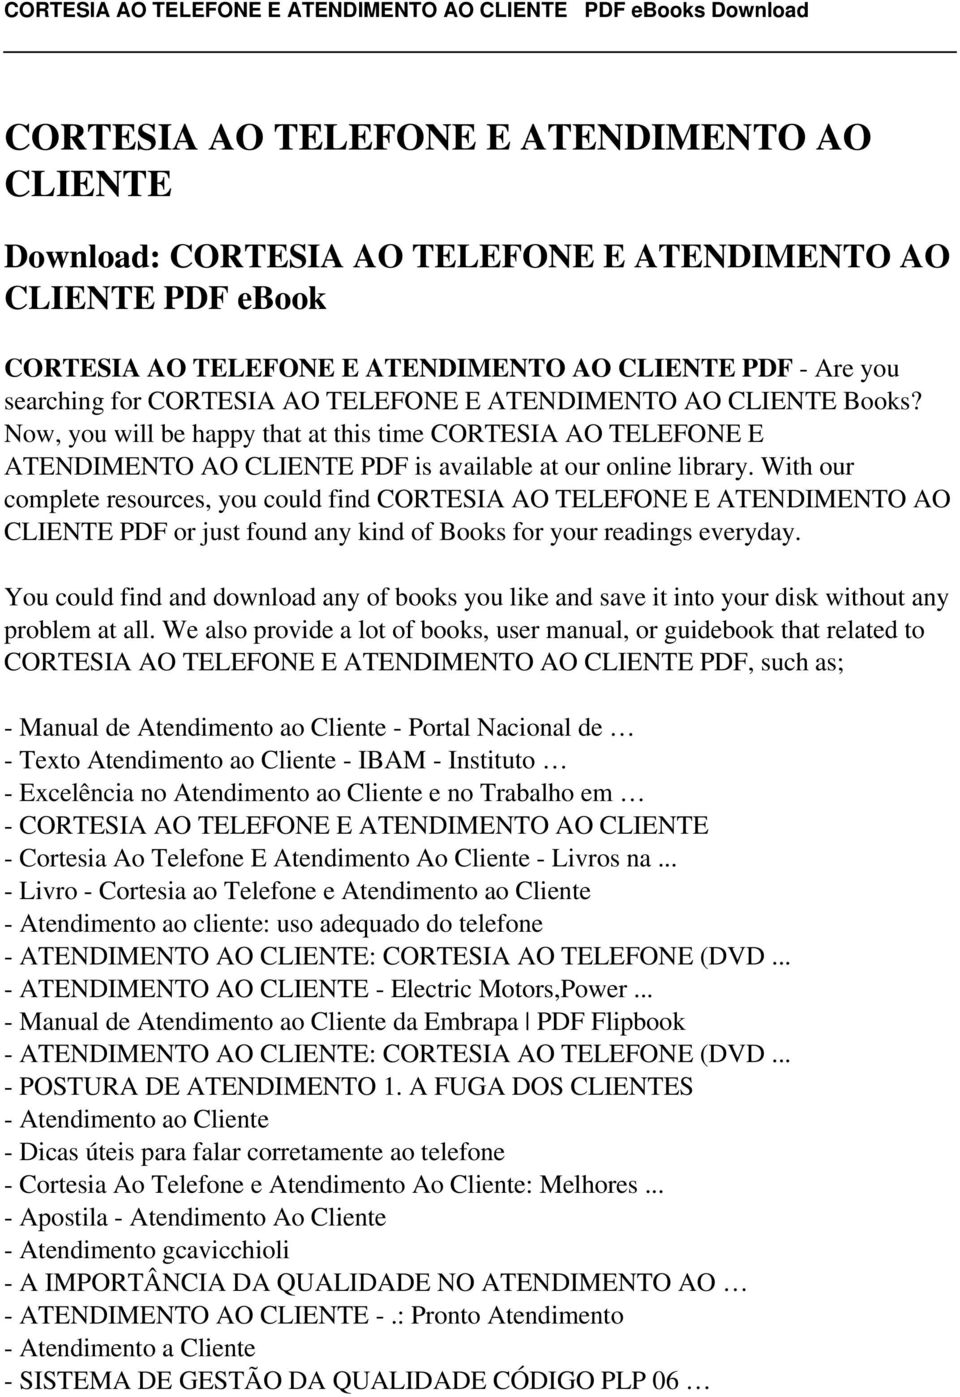 With our complete resources, you could find CORTESIA AO TELEFONE E ATENDIMENTO AO CLIENTE PDF or just found any kind of Books for your readings everyday.